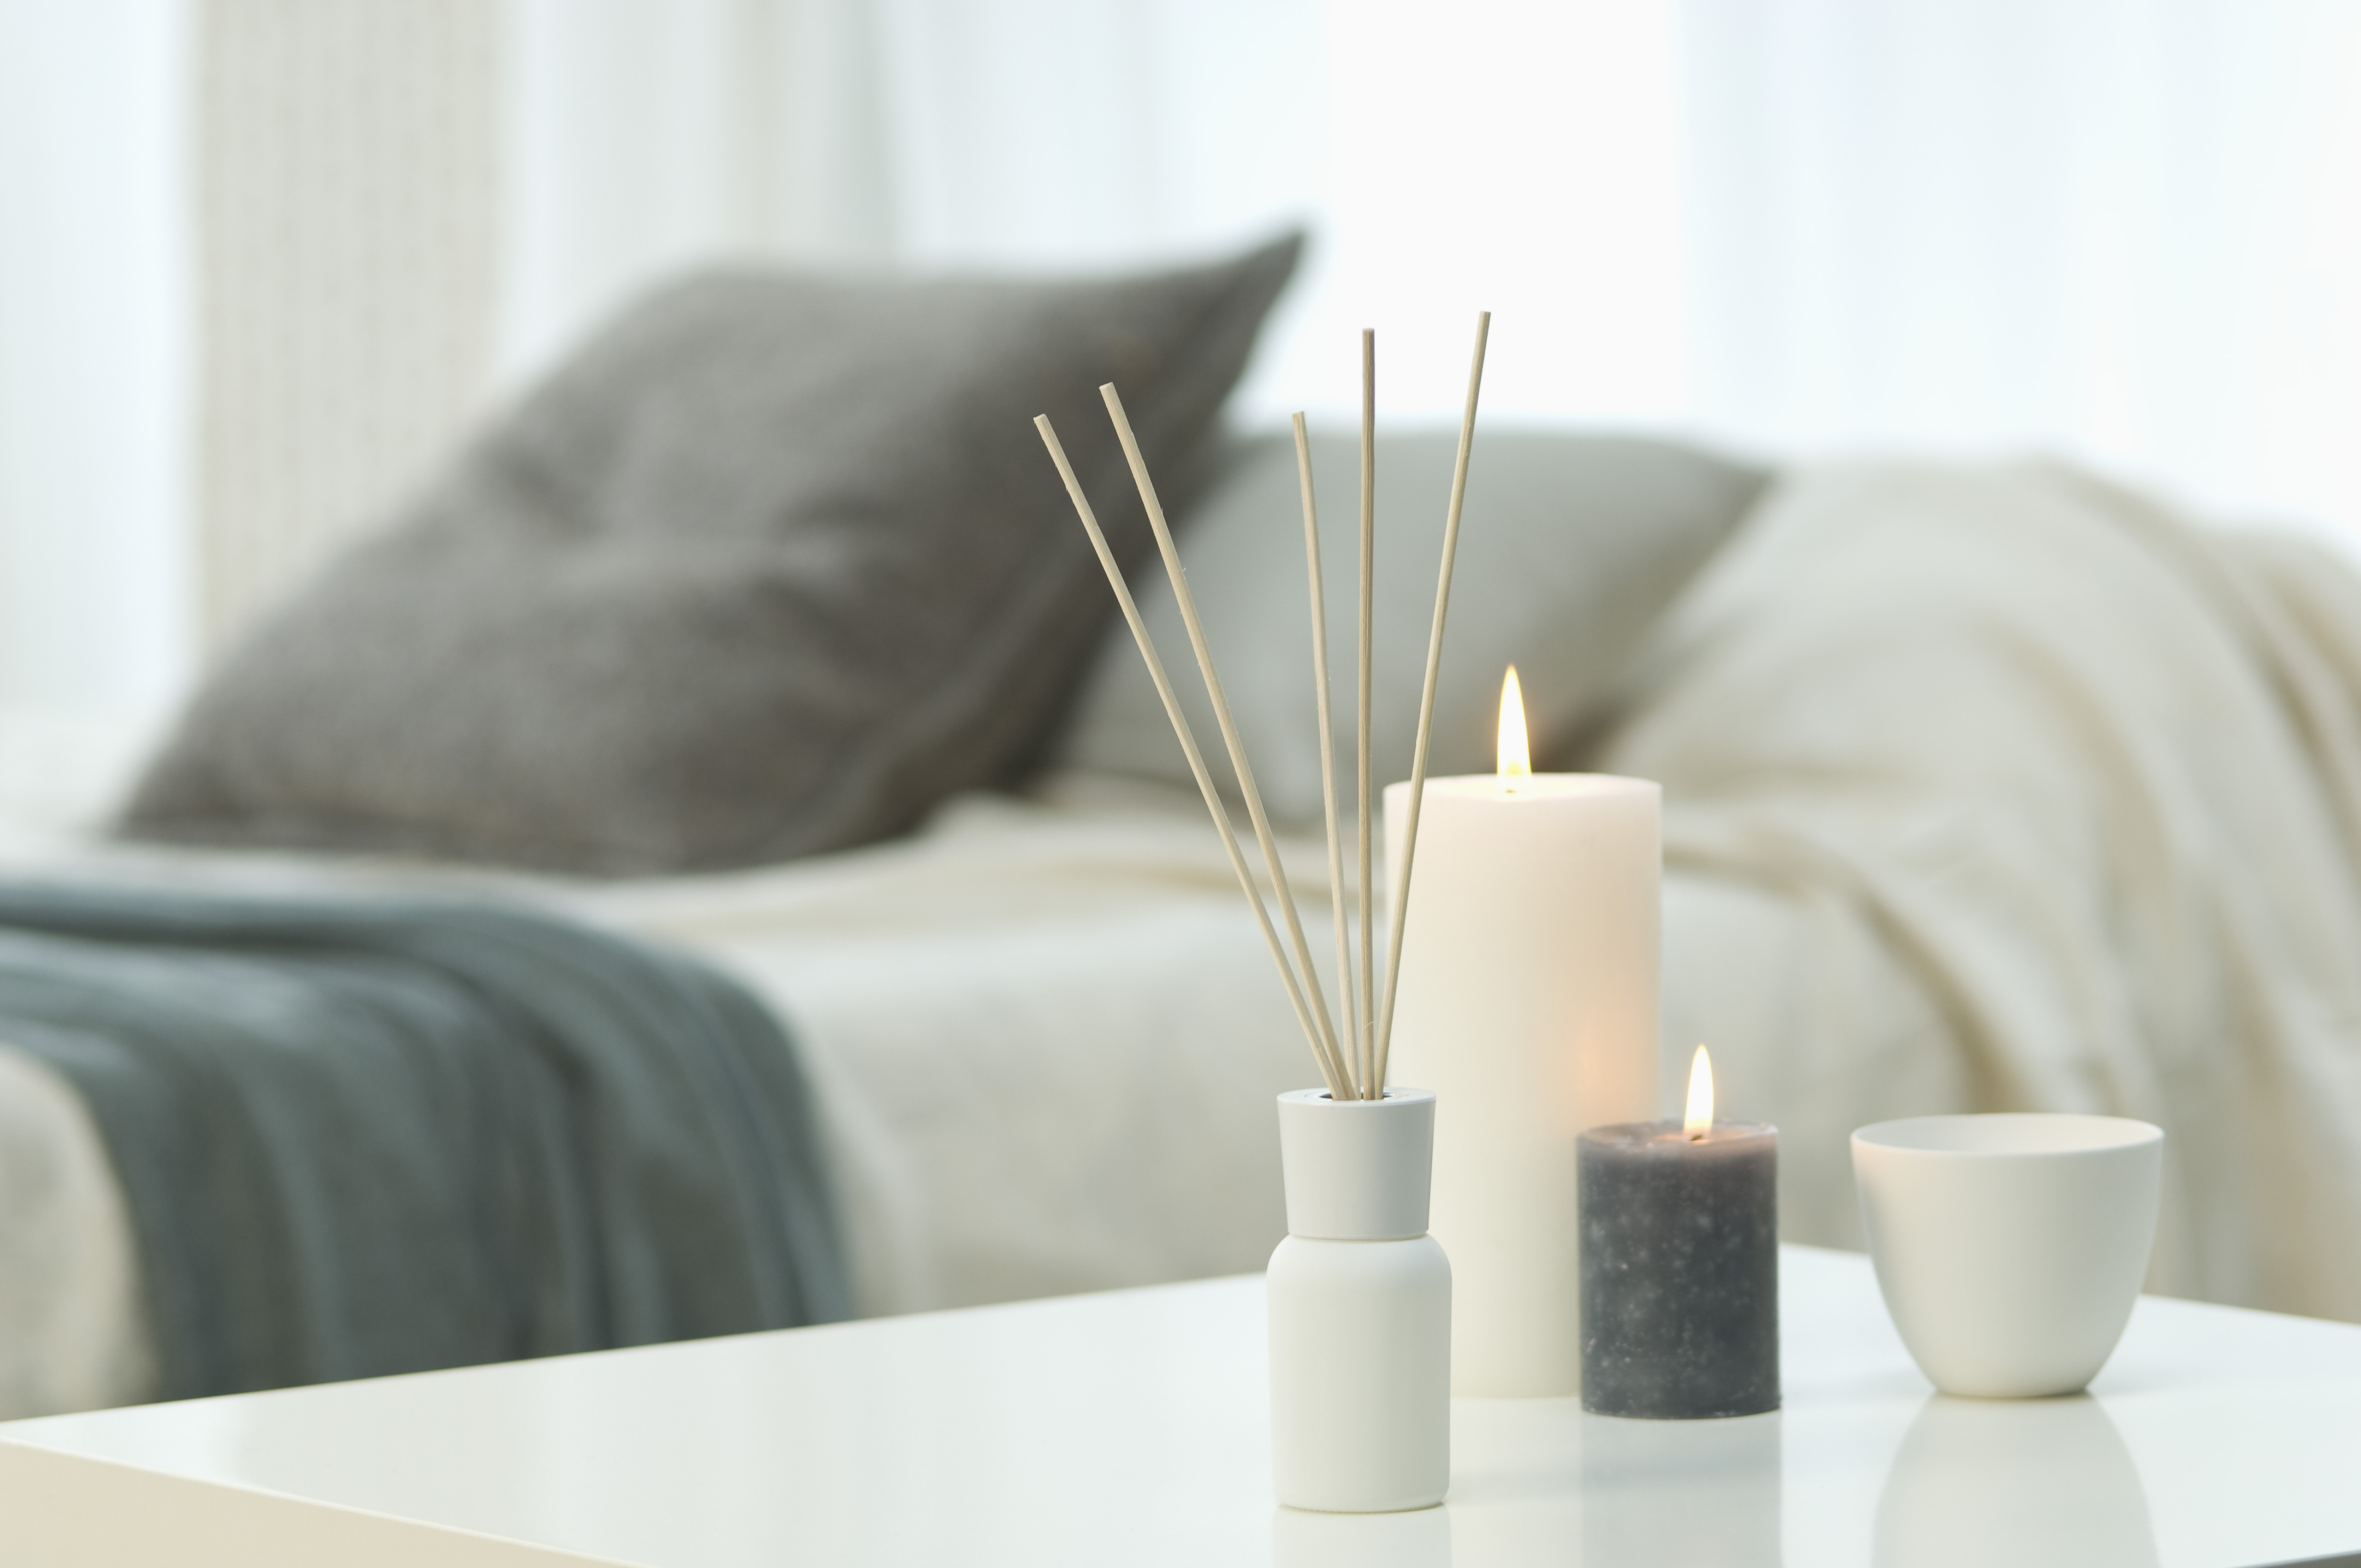 Aromatheraphy, candles and incense sticks on table with bed in background